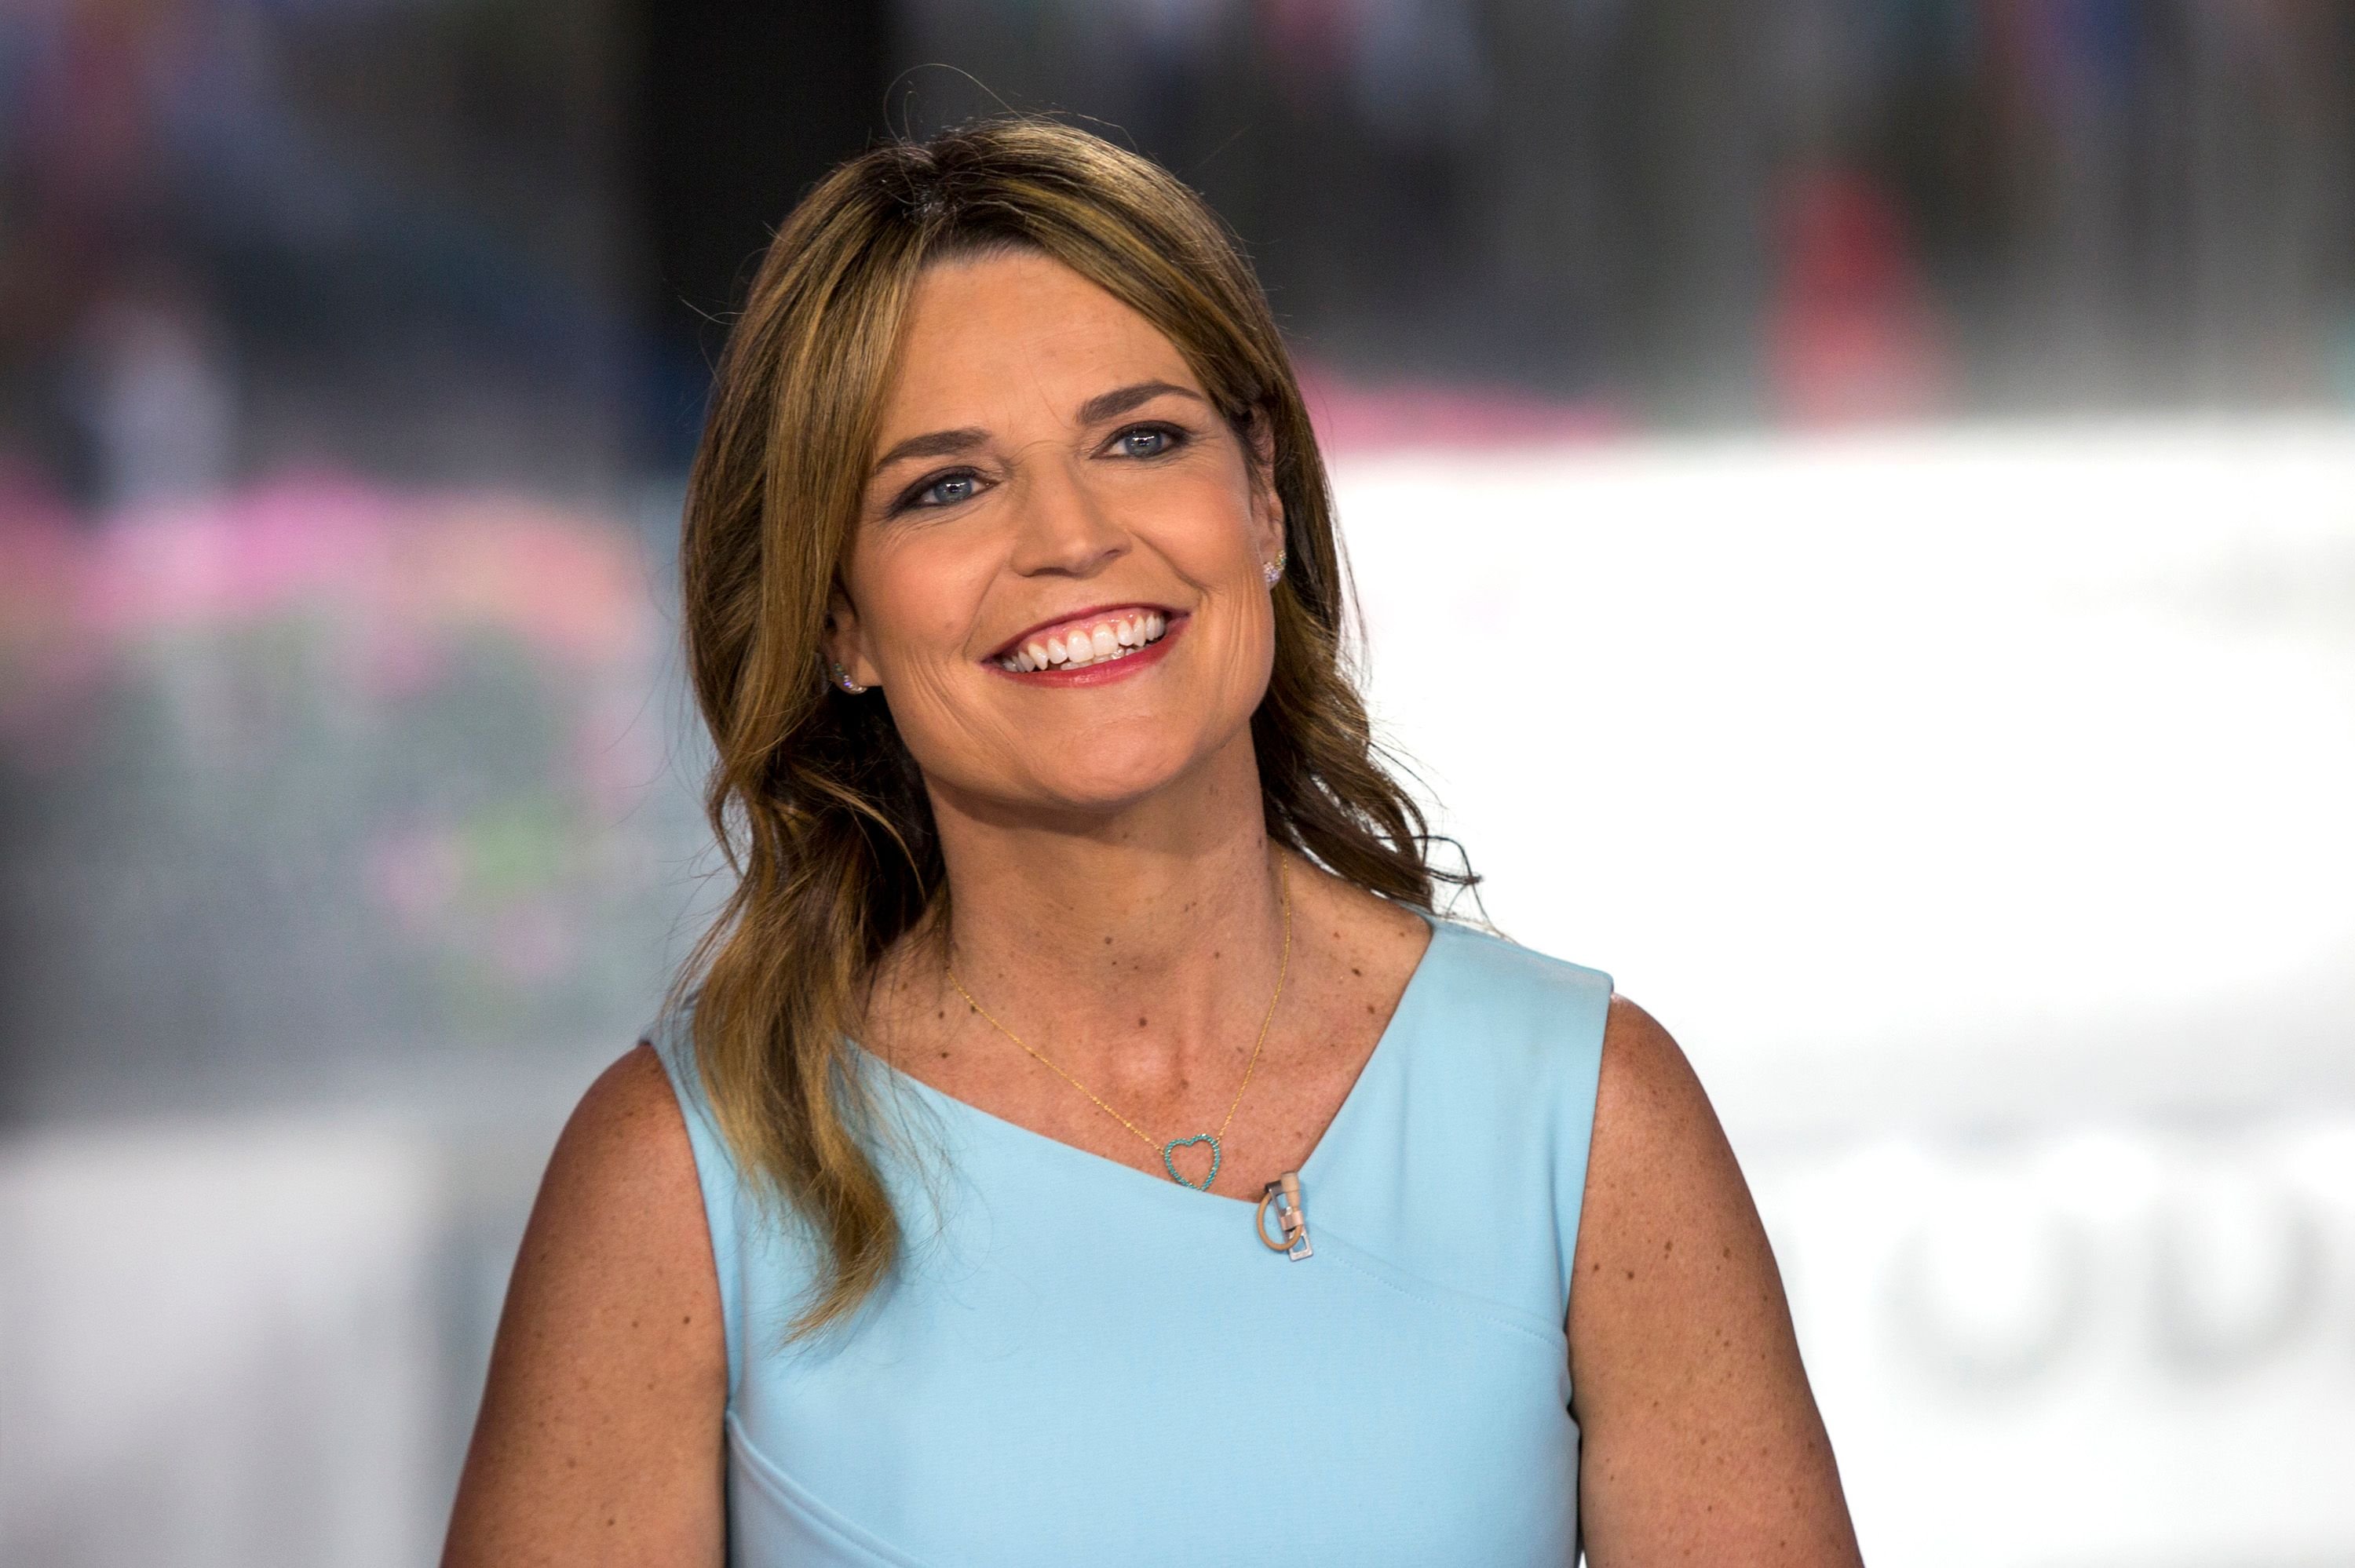 Savannah Guthrie on the 67th Season of "Today" show on Wednesday June 13, 2018 | Photo: Getty Images